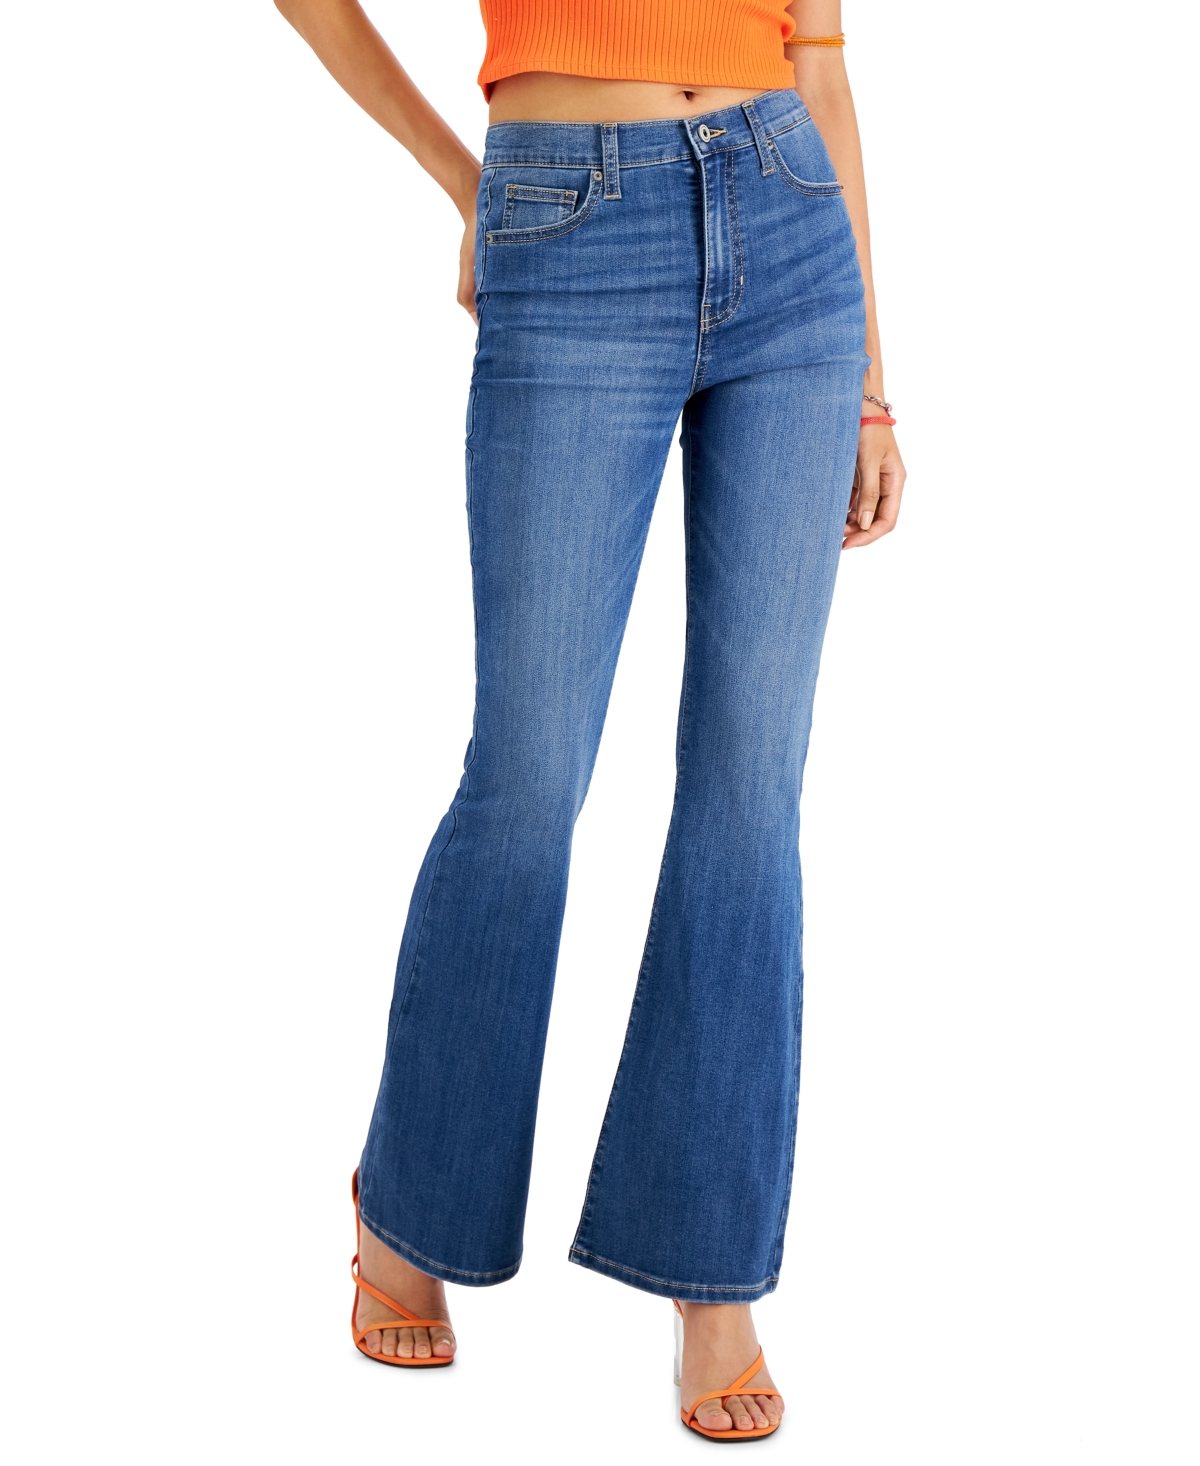  Celebrity Pink Juniors' High-Rise Flare Jeans